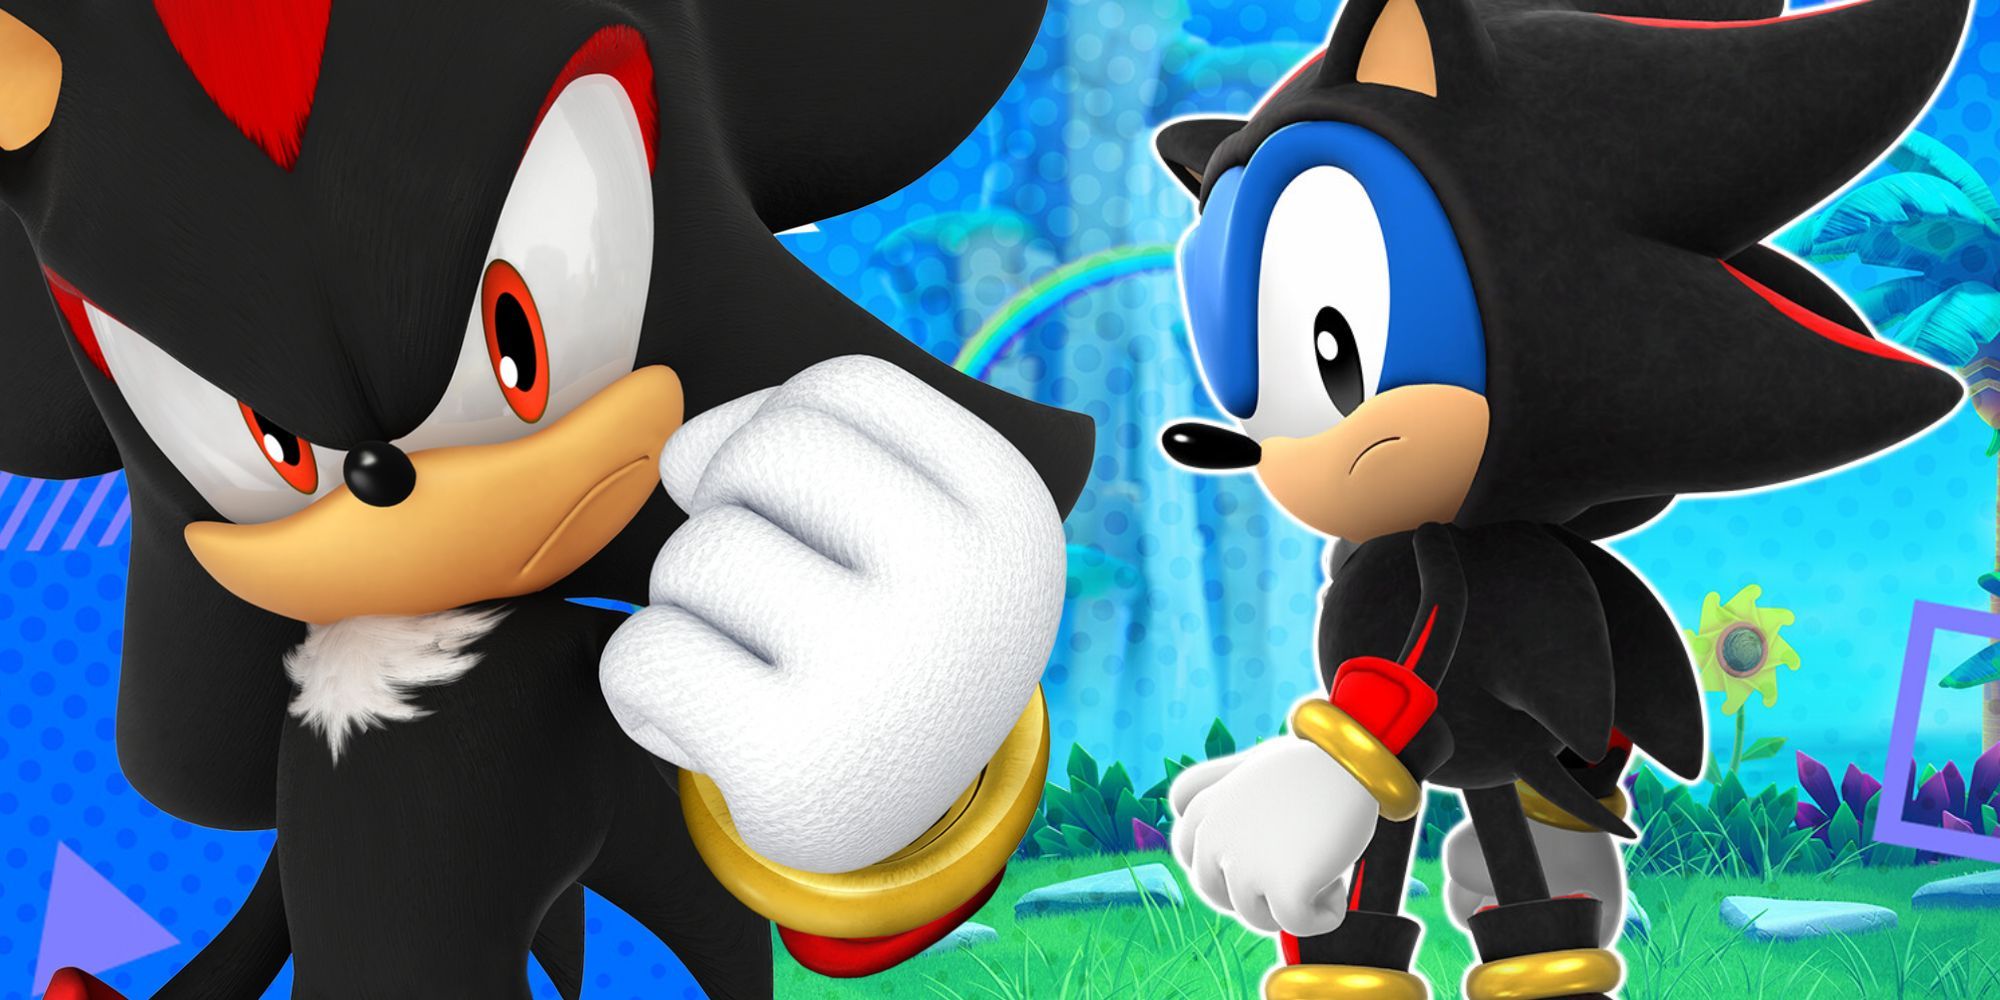 Left: Shadow the Hedgehog. Right: Classic Sonic wearing a Shadow outfit